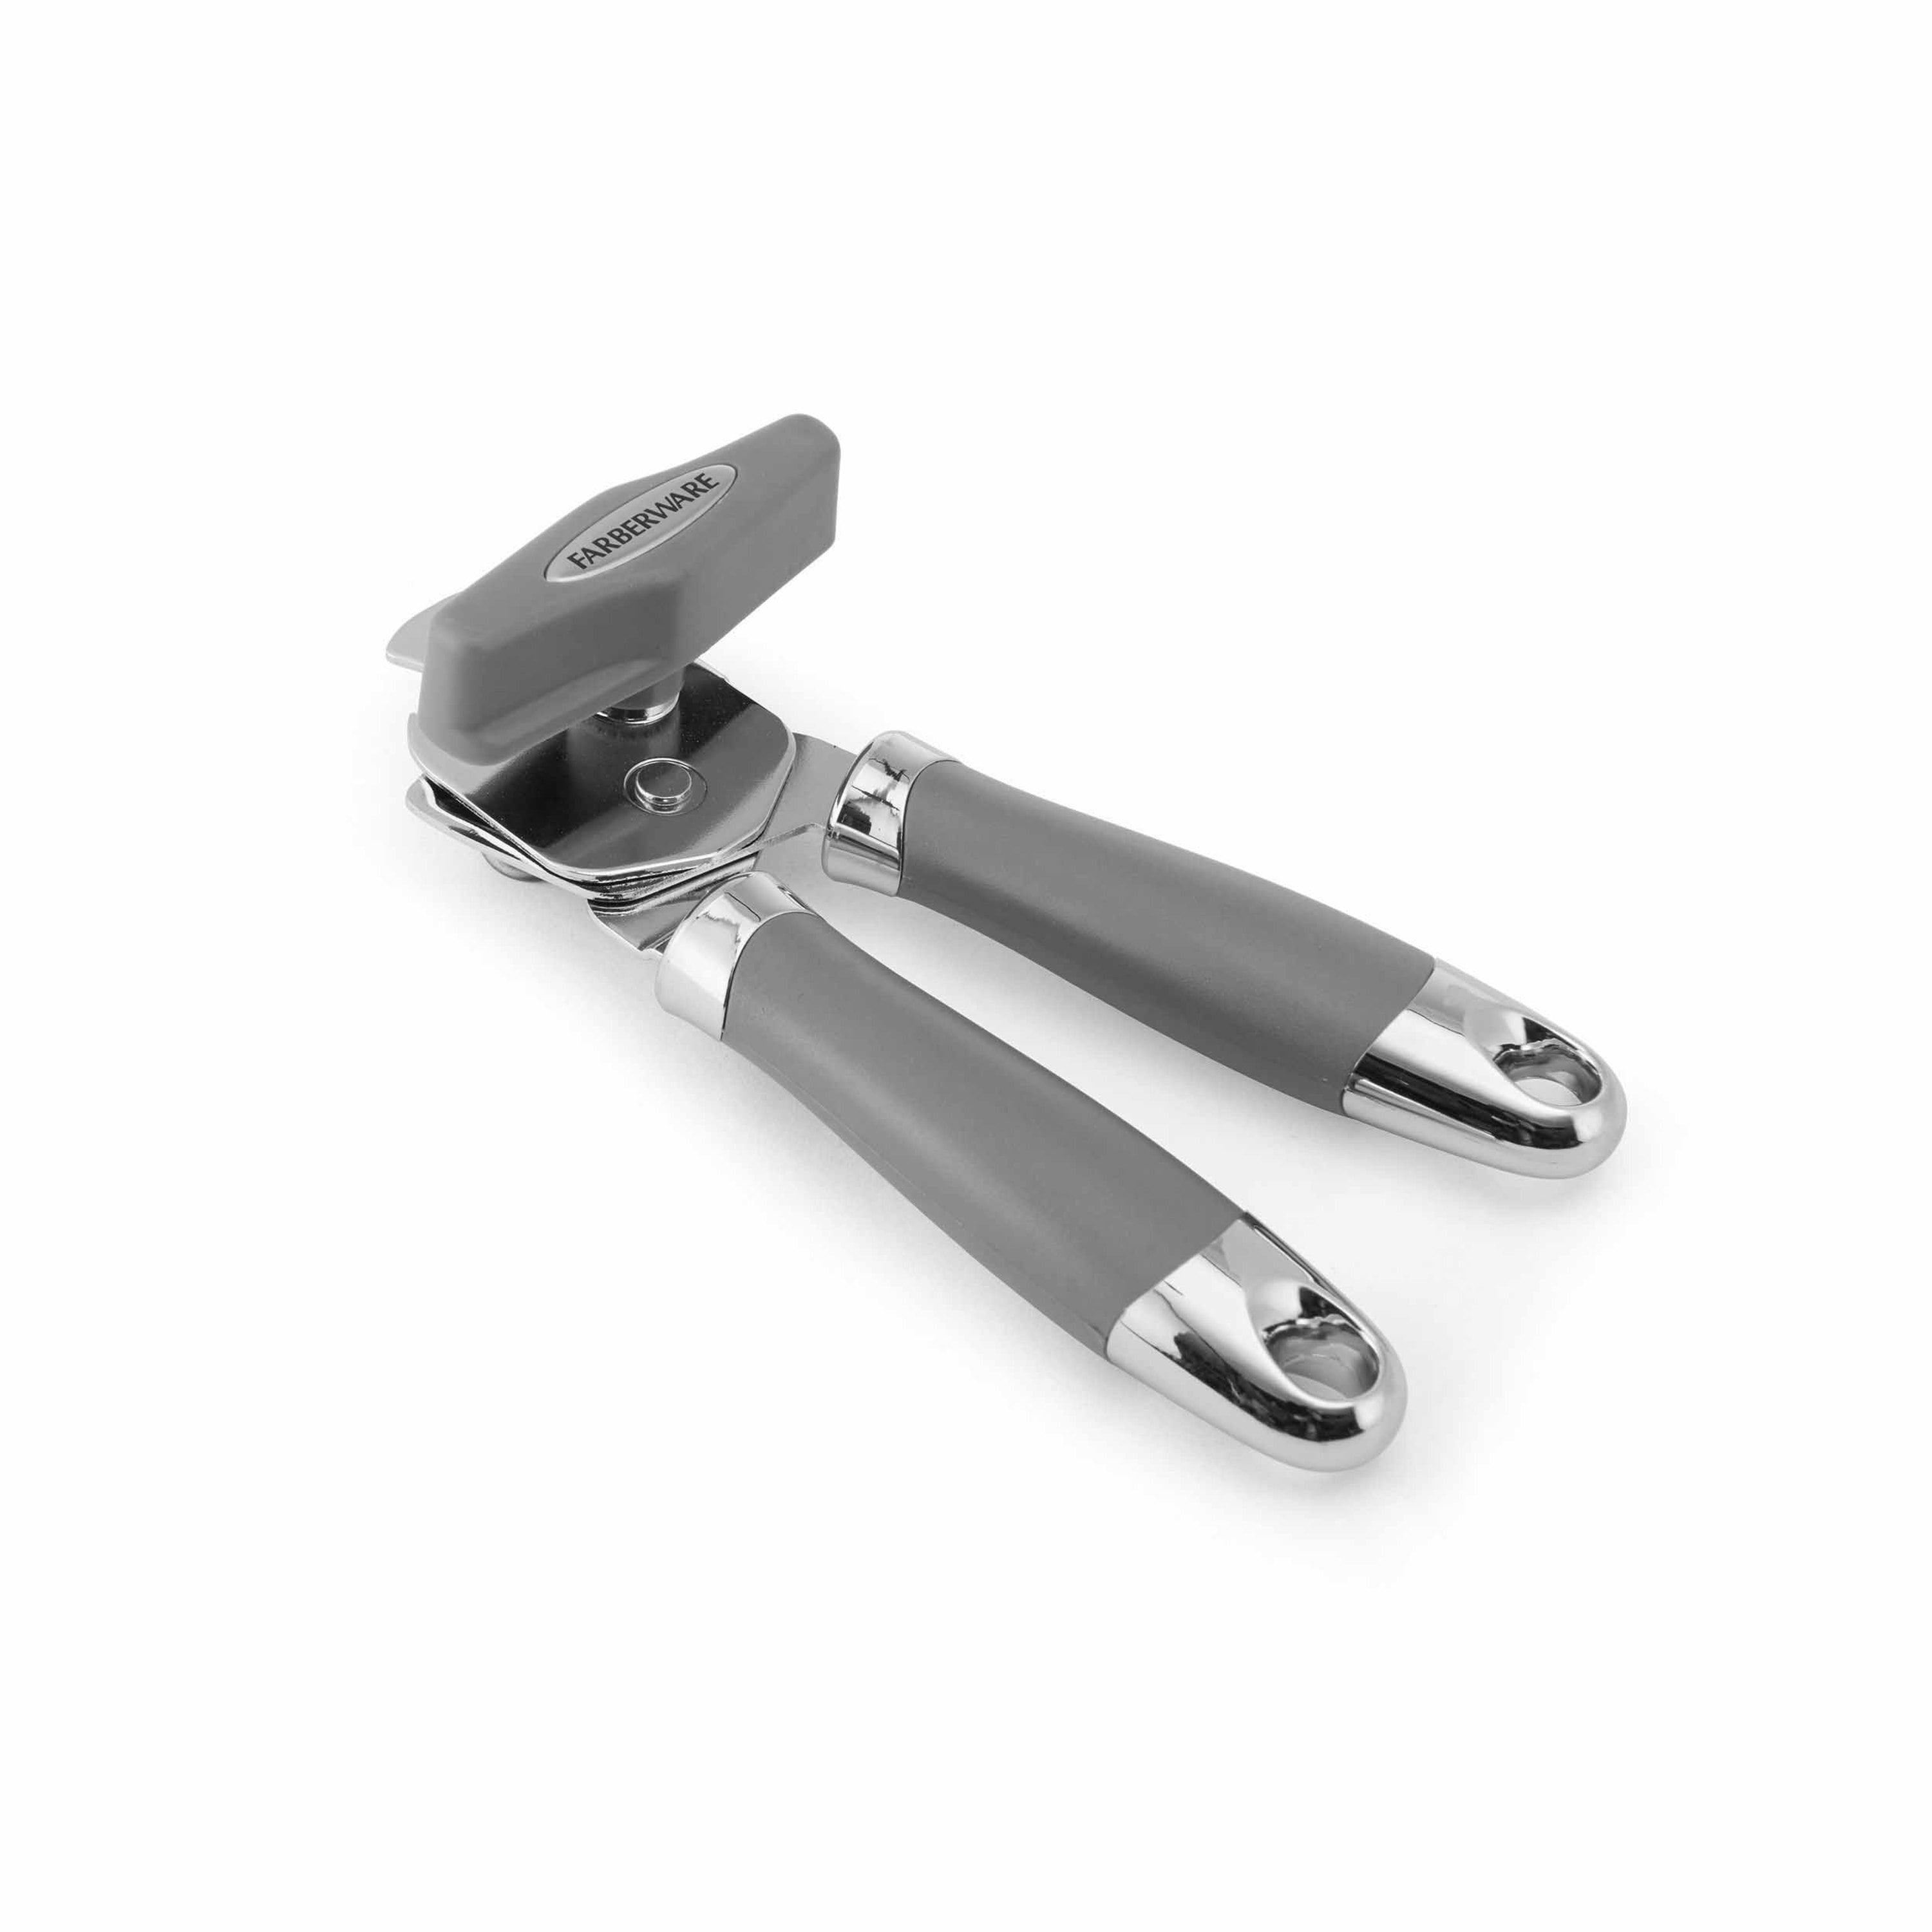 Details about   Farberware 5227163 Professional Manual Can Opener Black Silver One Size 